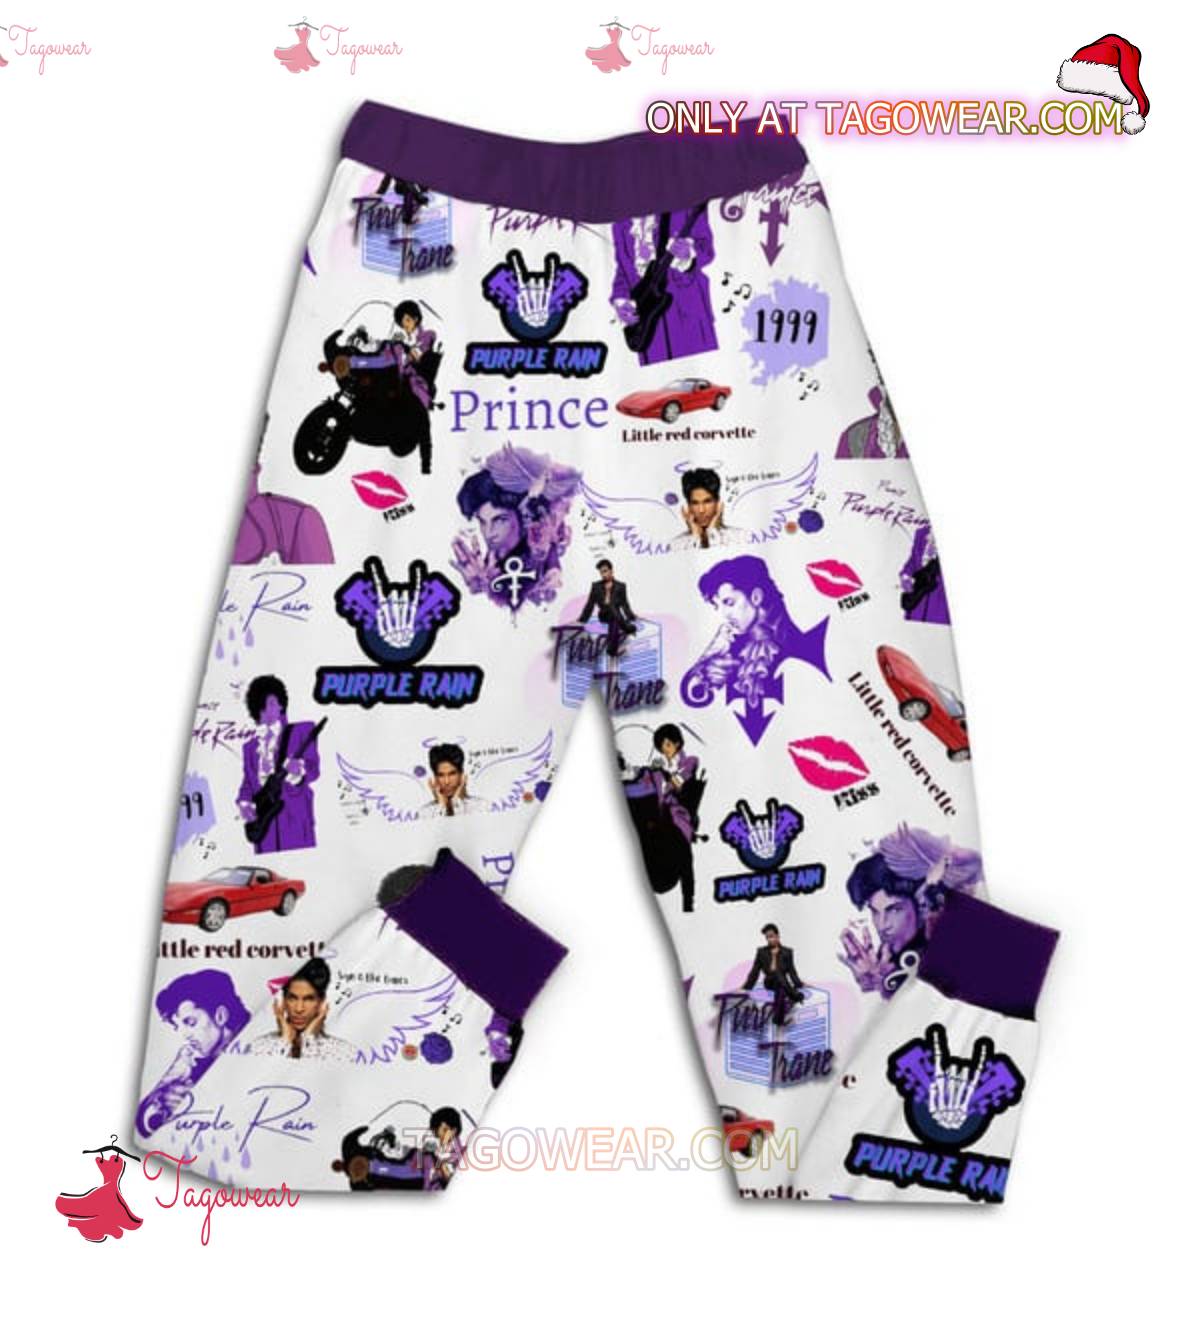 Prince I Only Want To See You Laughing In The Purple Rain Pajamas Set b